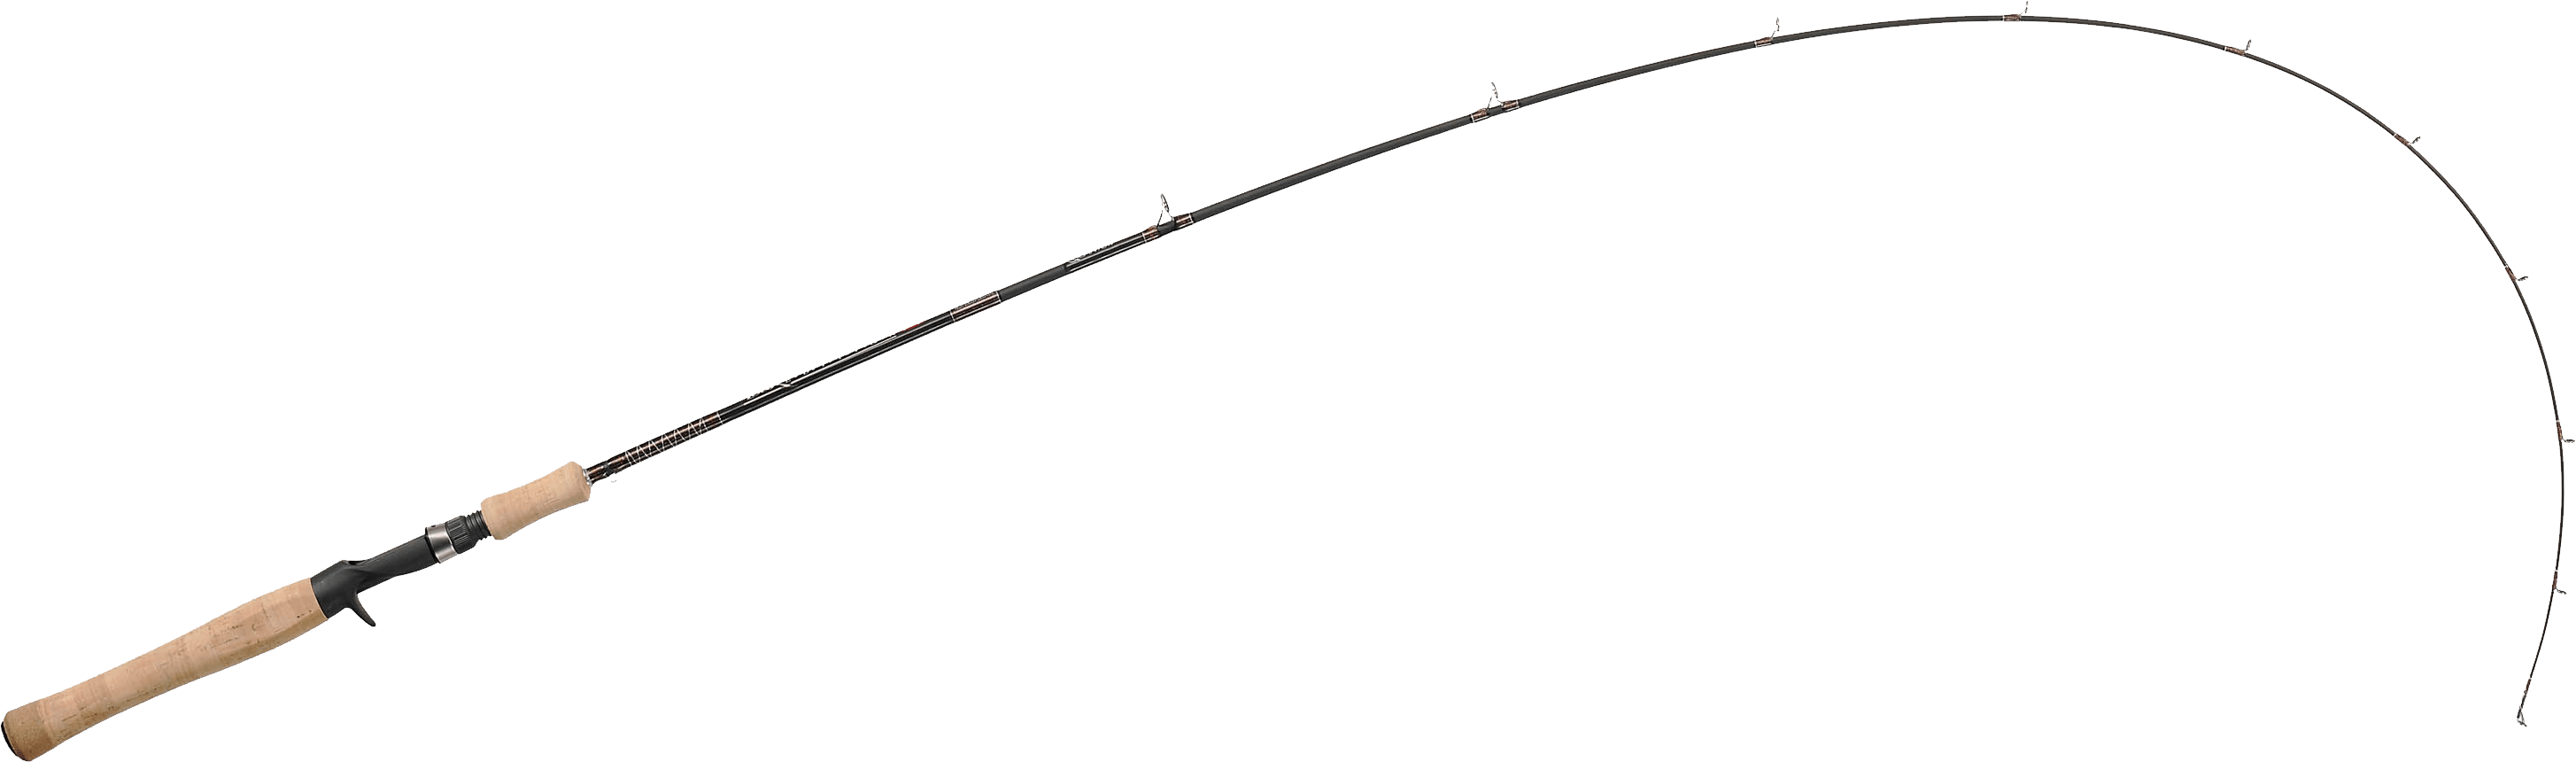 Fishing clipart fishing pole.  collection of transparent